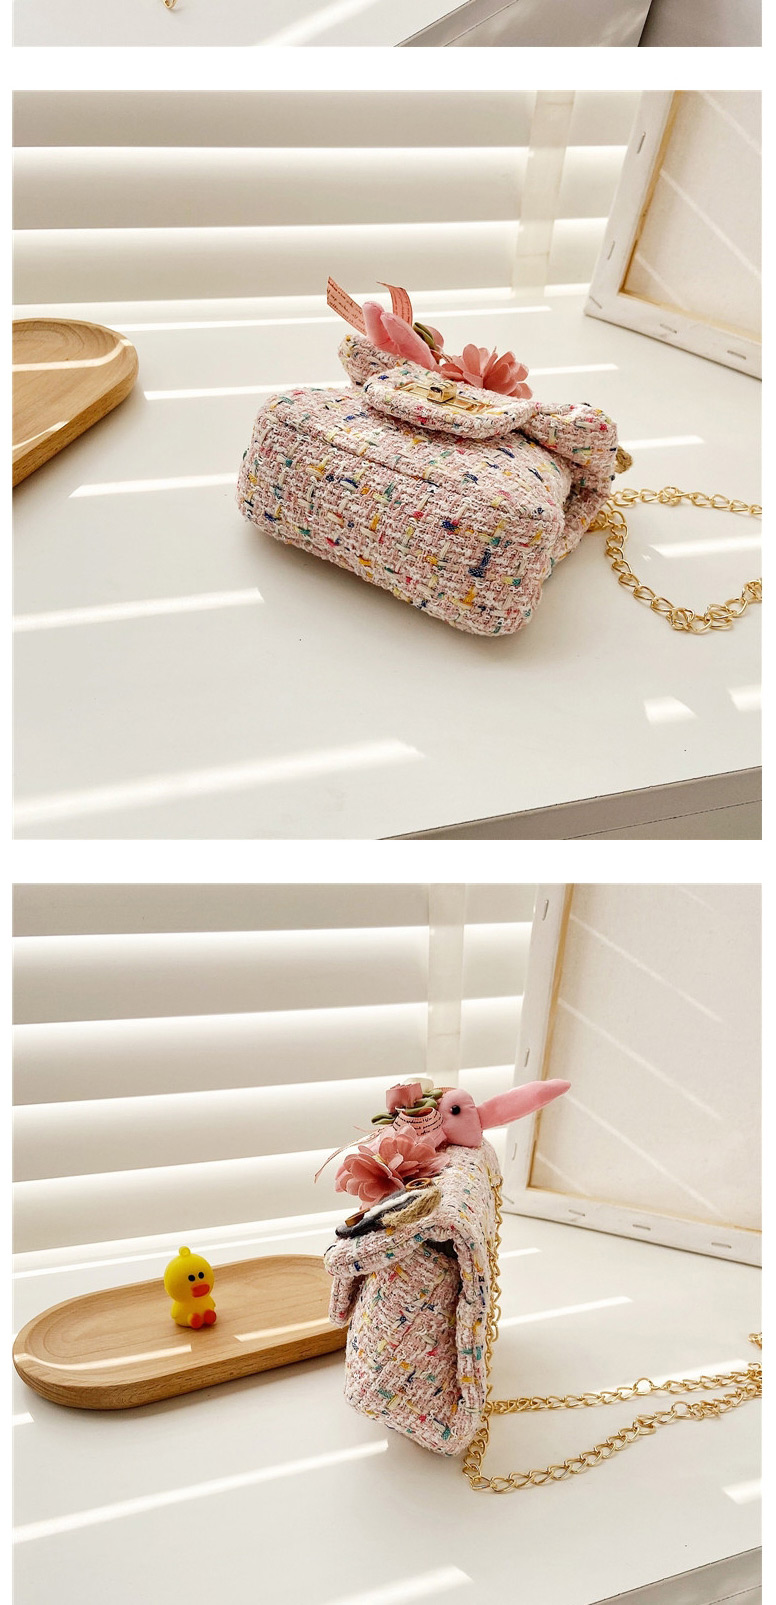 Fashion Two White Childrens Shoulder Messenger Bag With Chain Lock Flap Flower,Shoulder bags